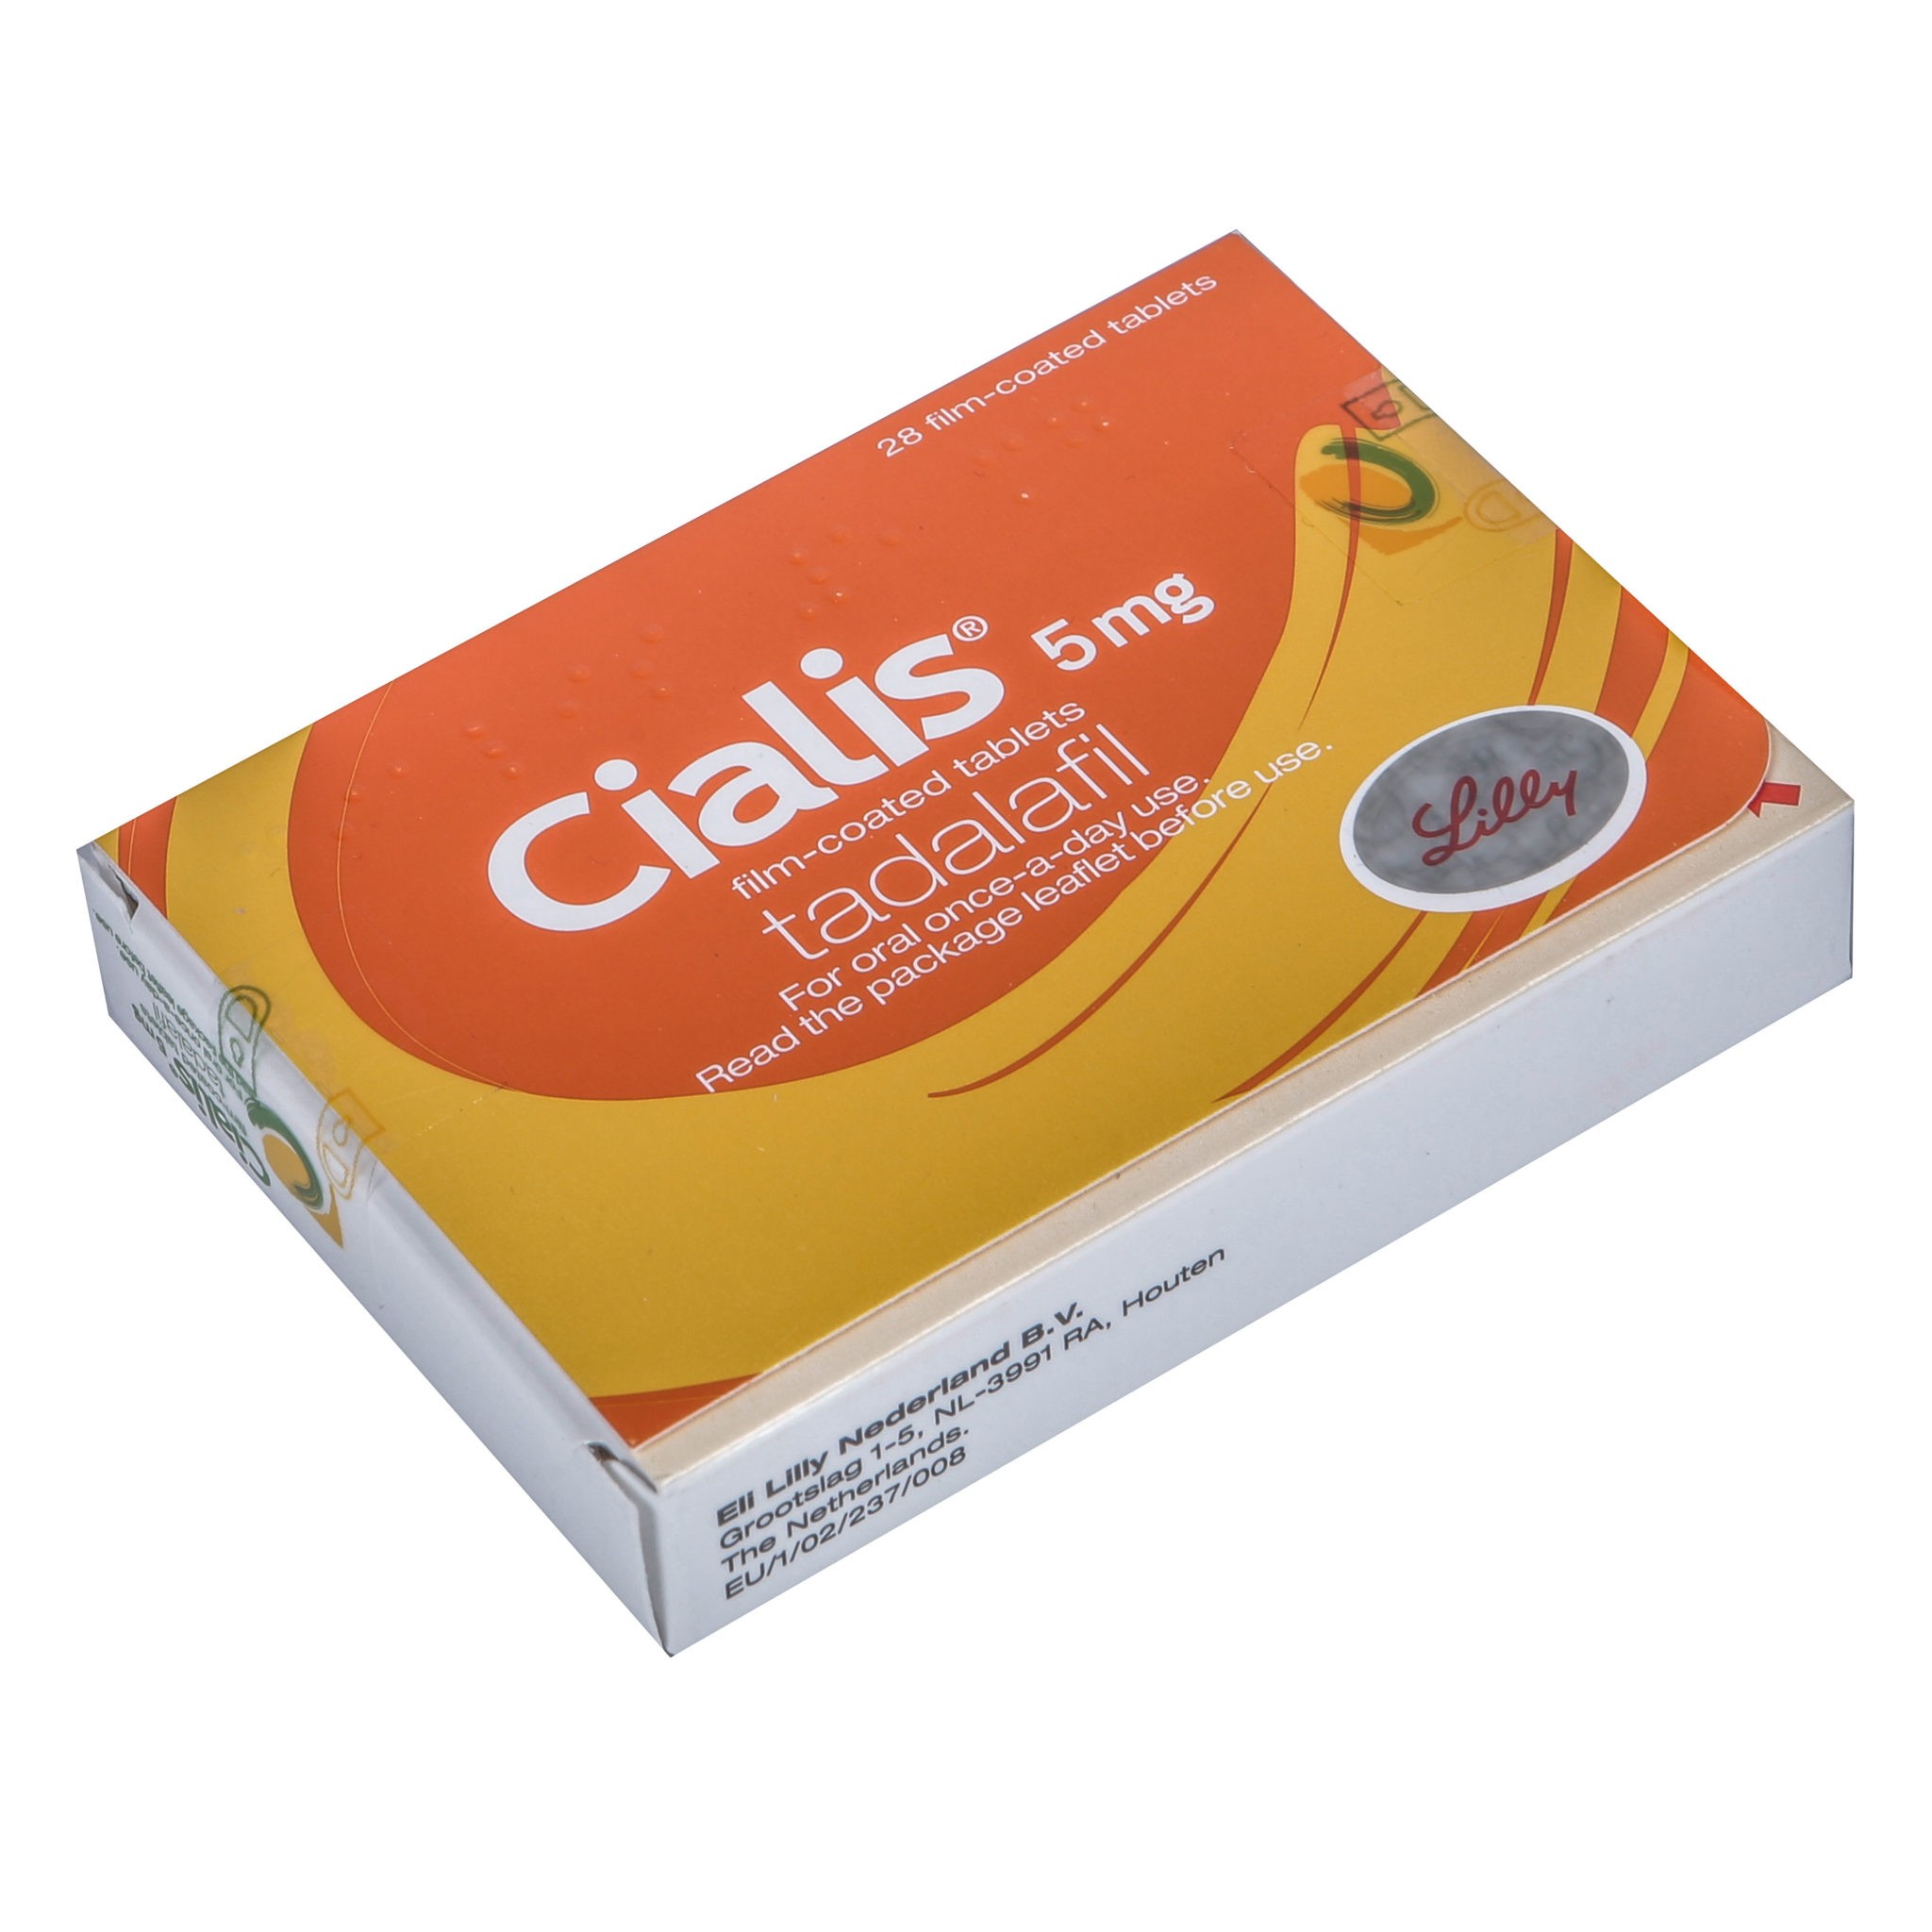 Cialis Daily 5mg Tablets (56 Tablets)